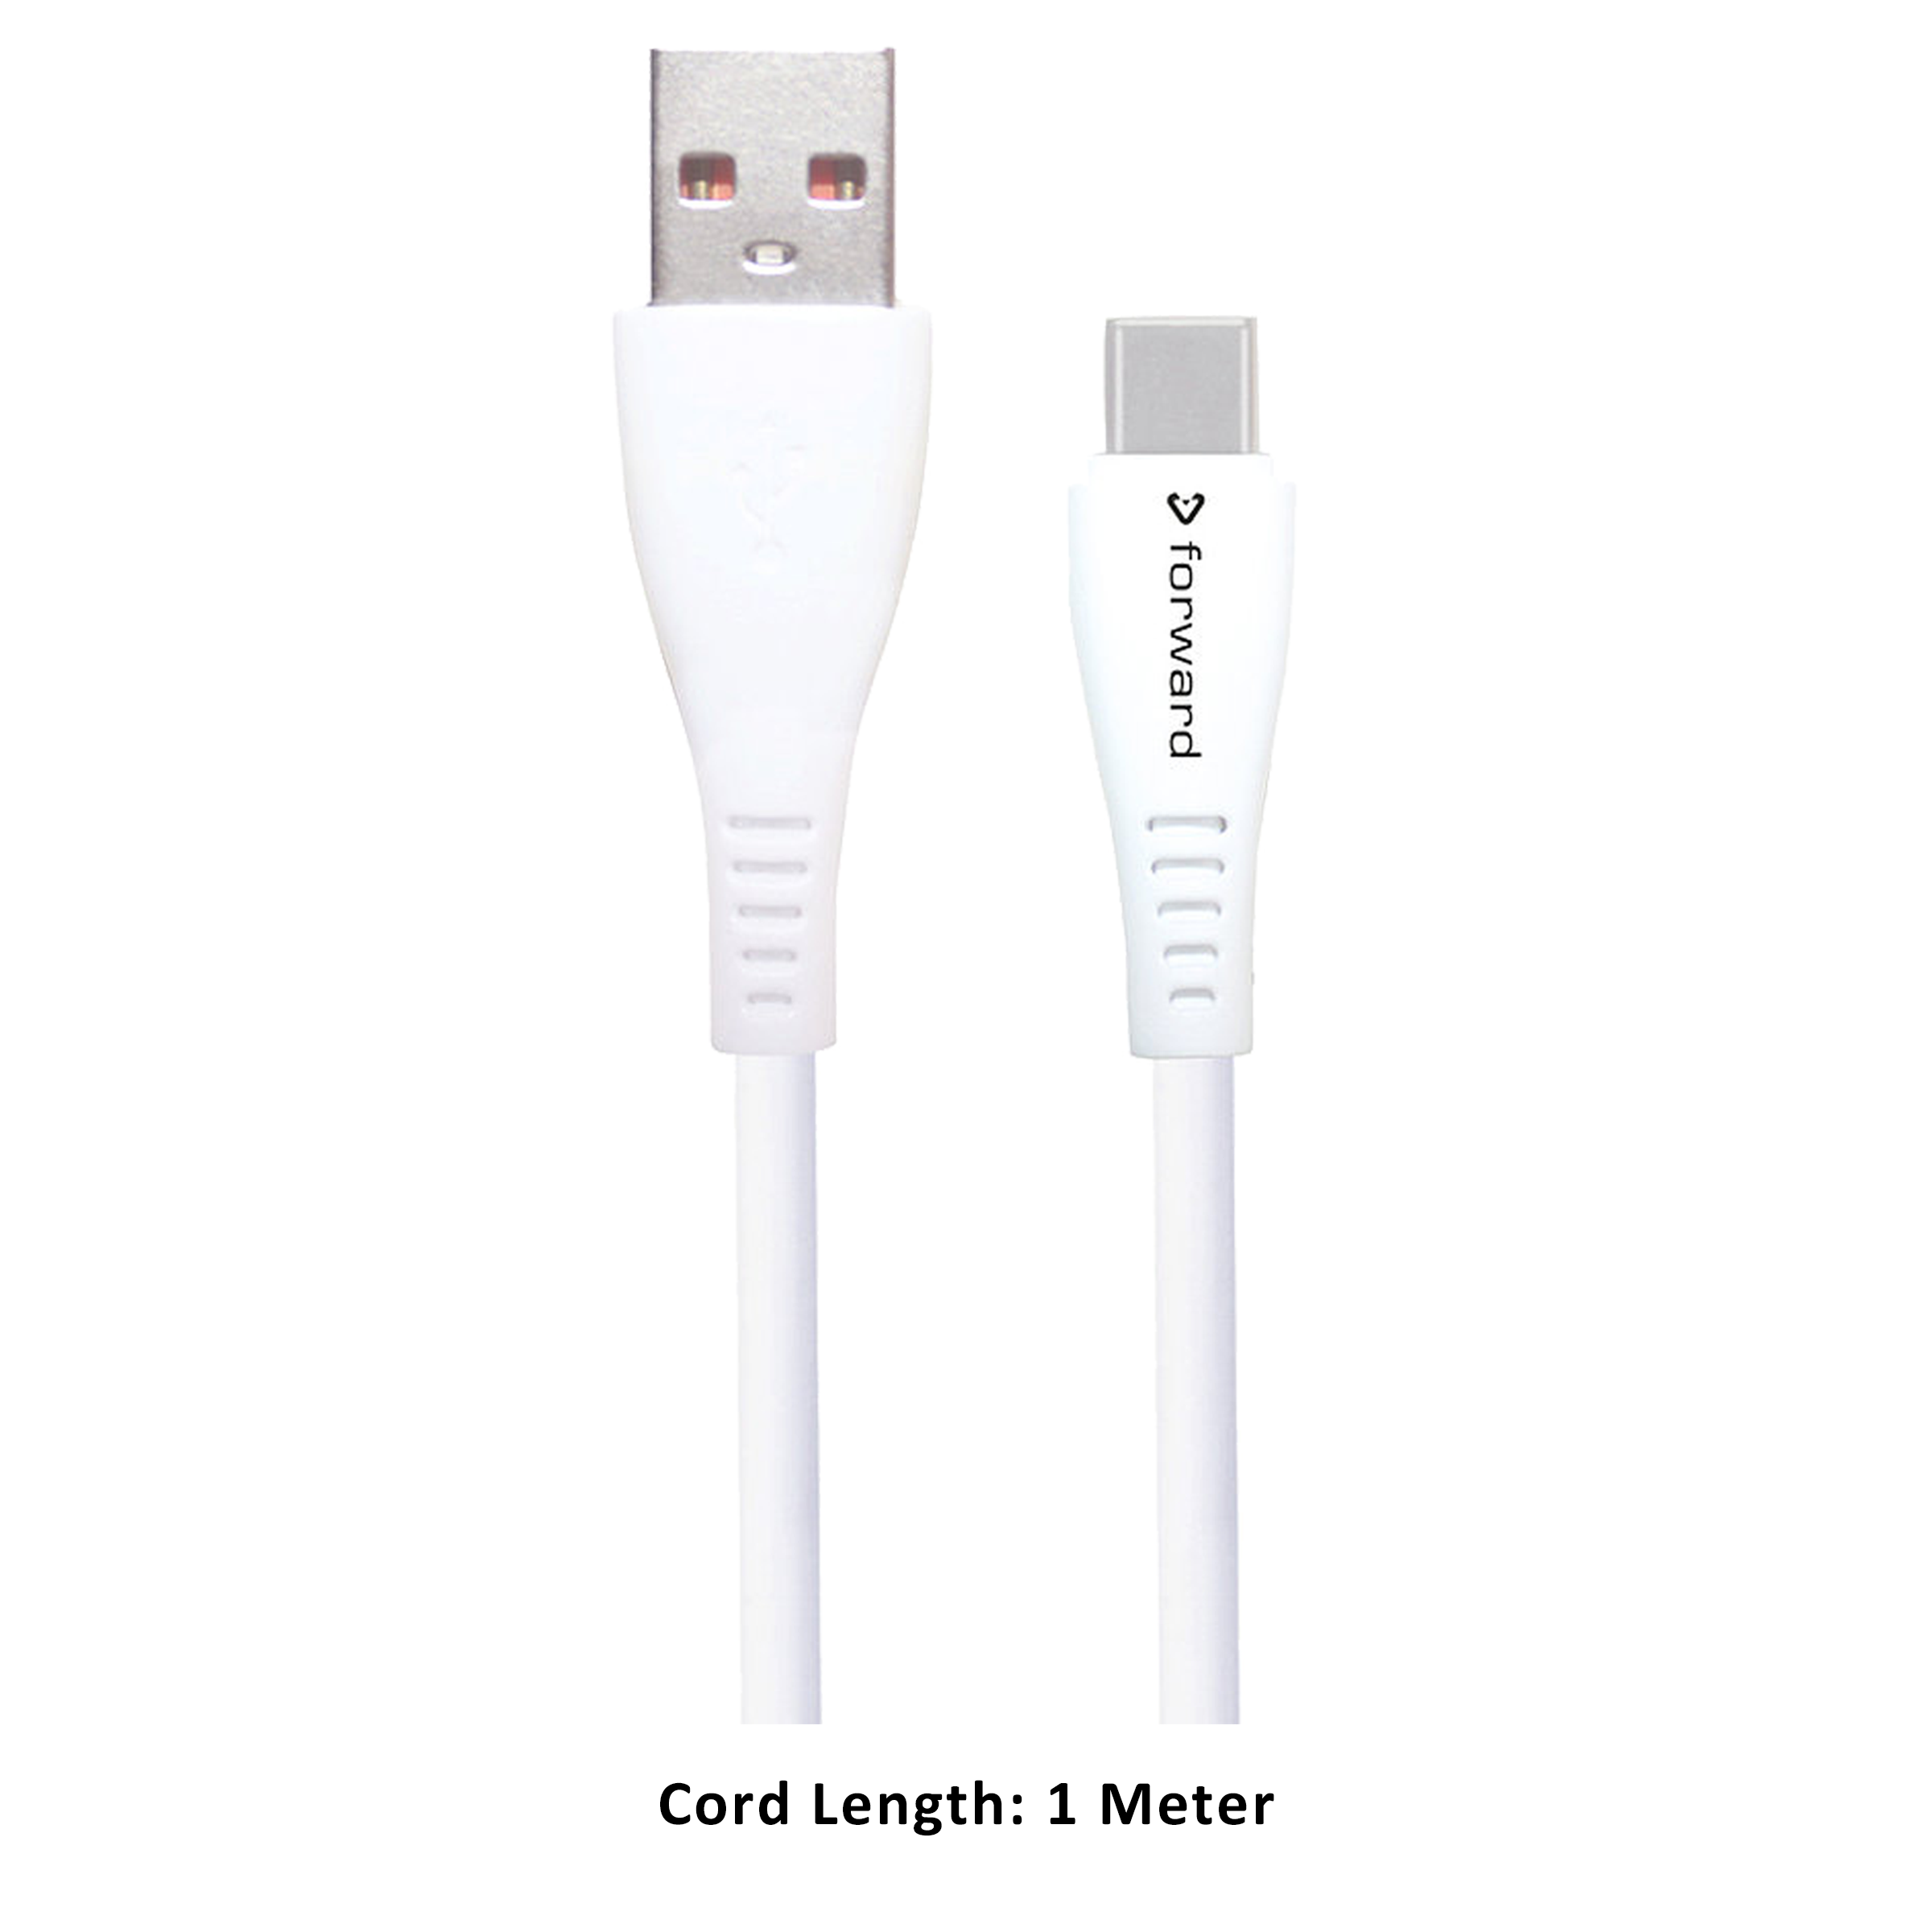 Forward PVC 1 Meter USB 2.0 (Type-A) to USB 3.0 (Type-C) Power/Charging, Data Transfer USB Cable (Fast Charging, FCT09, White)_2